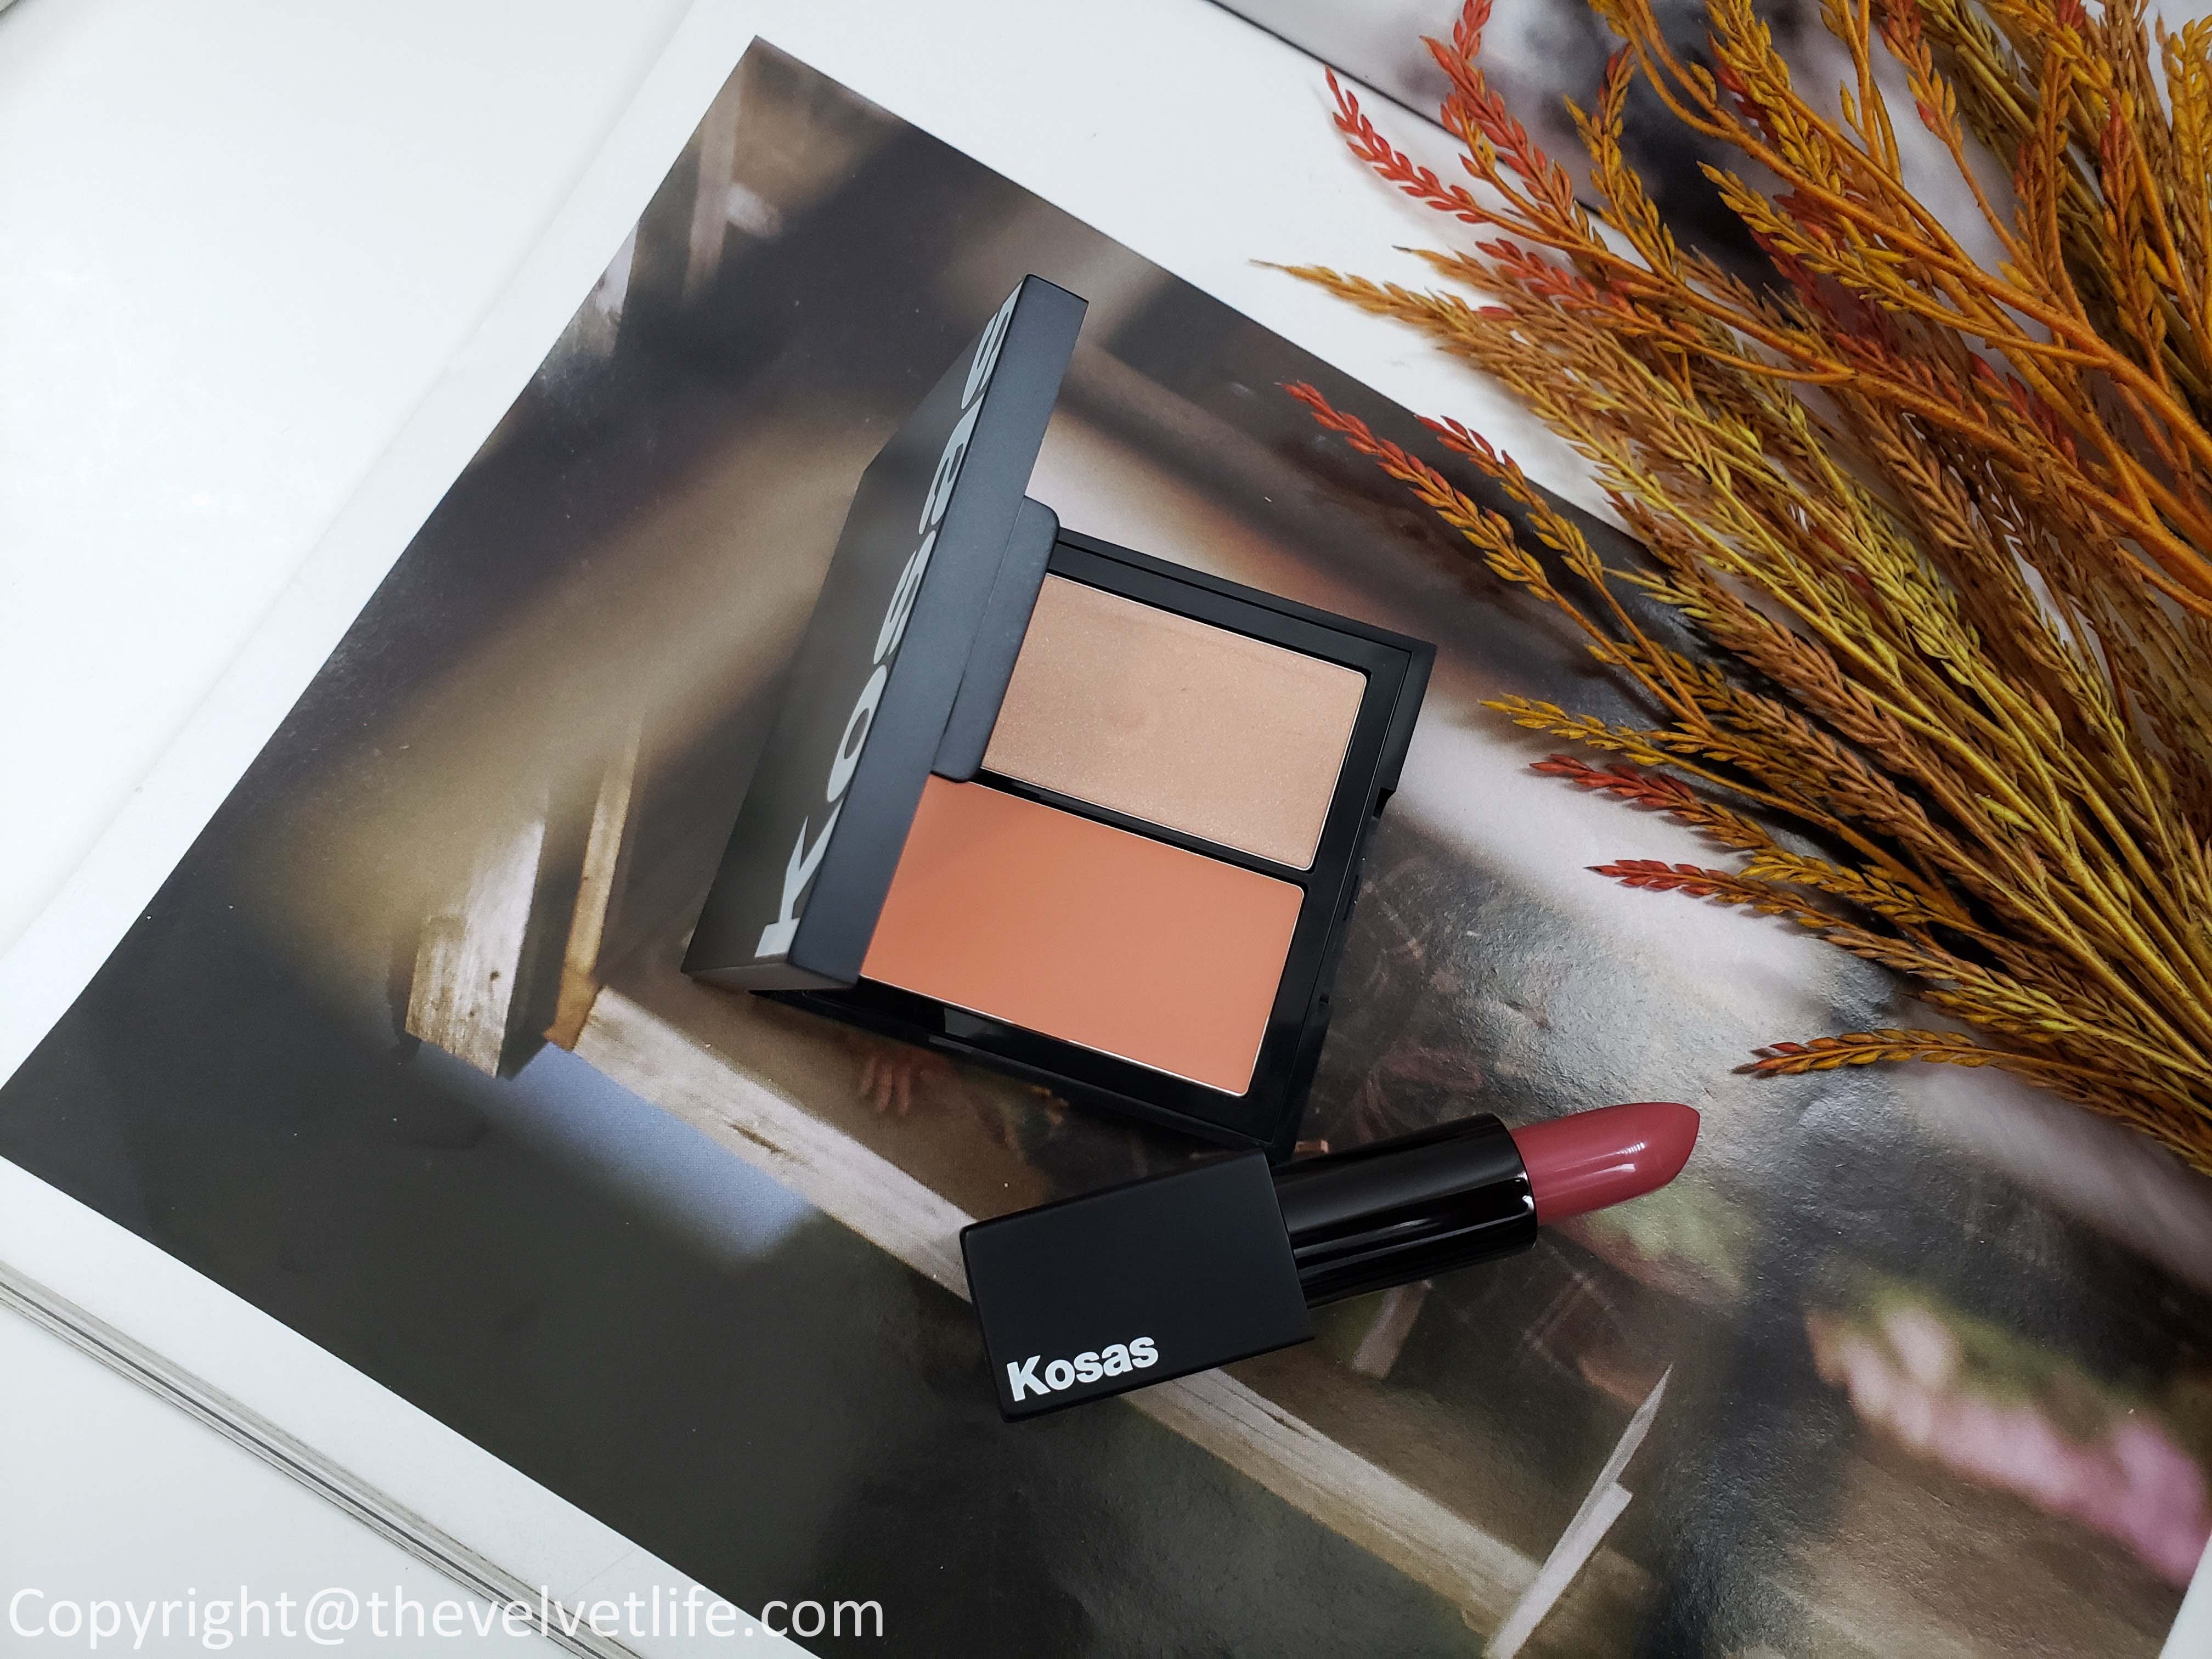 Kosas makeup review Revealer Concealer, The Big Clean Mascara, Weightless Lipstick Rosewater, and Color & Light Palette - Cream in Velvet Melon 